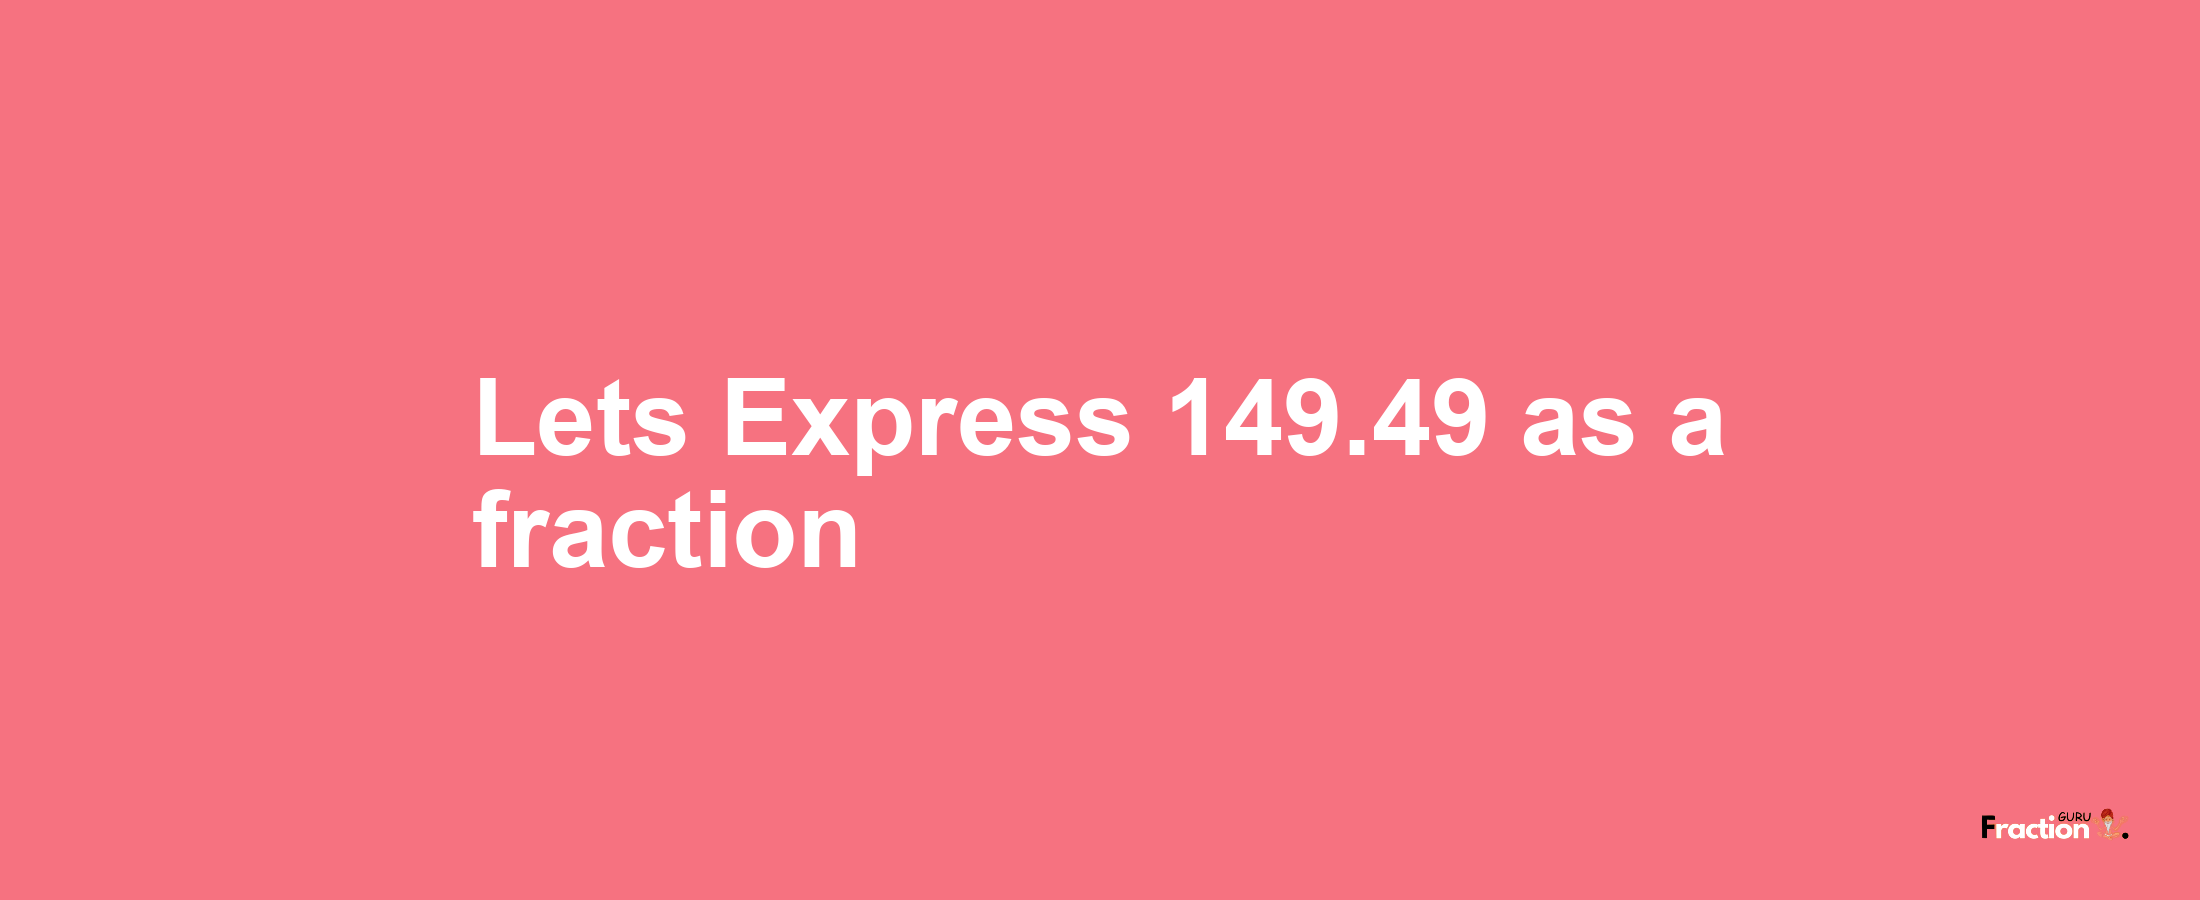 Lets Express 149.49 as afraction